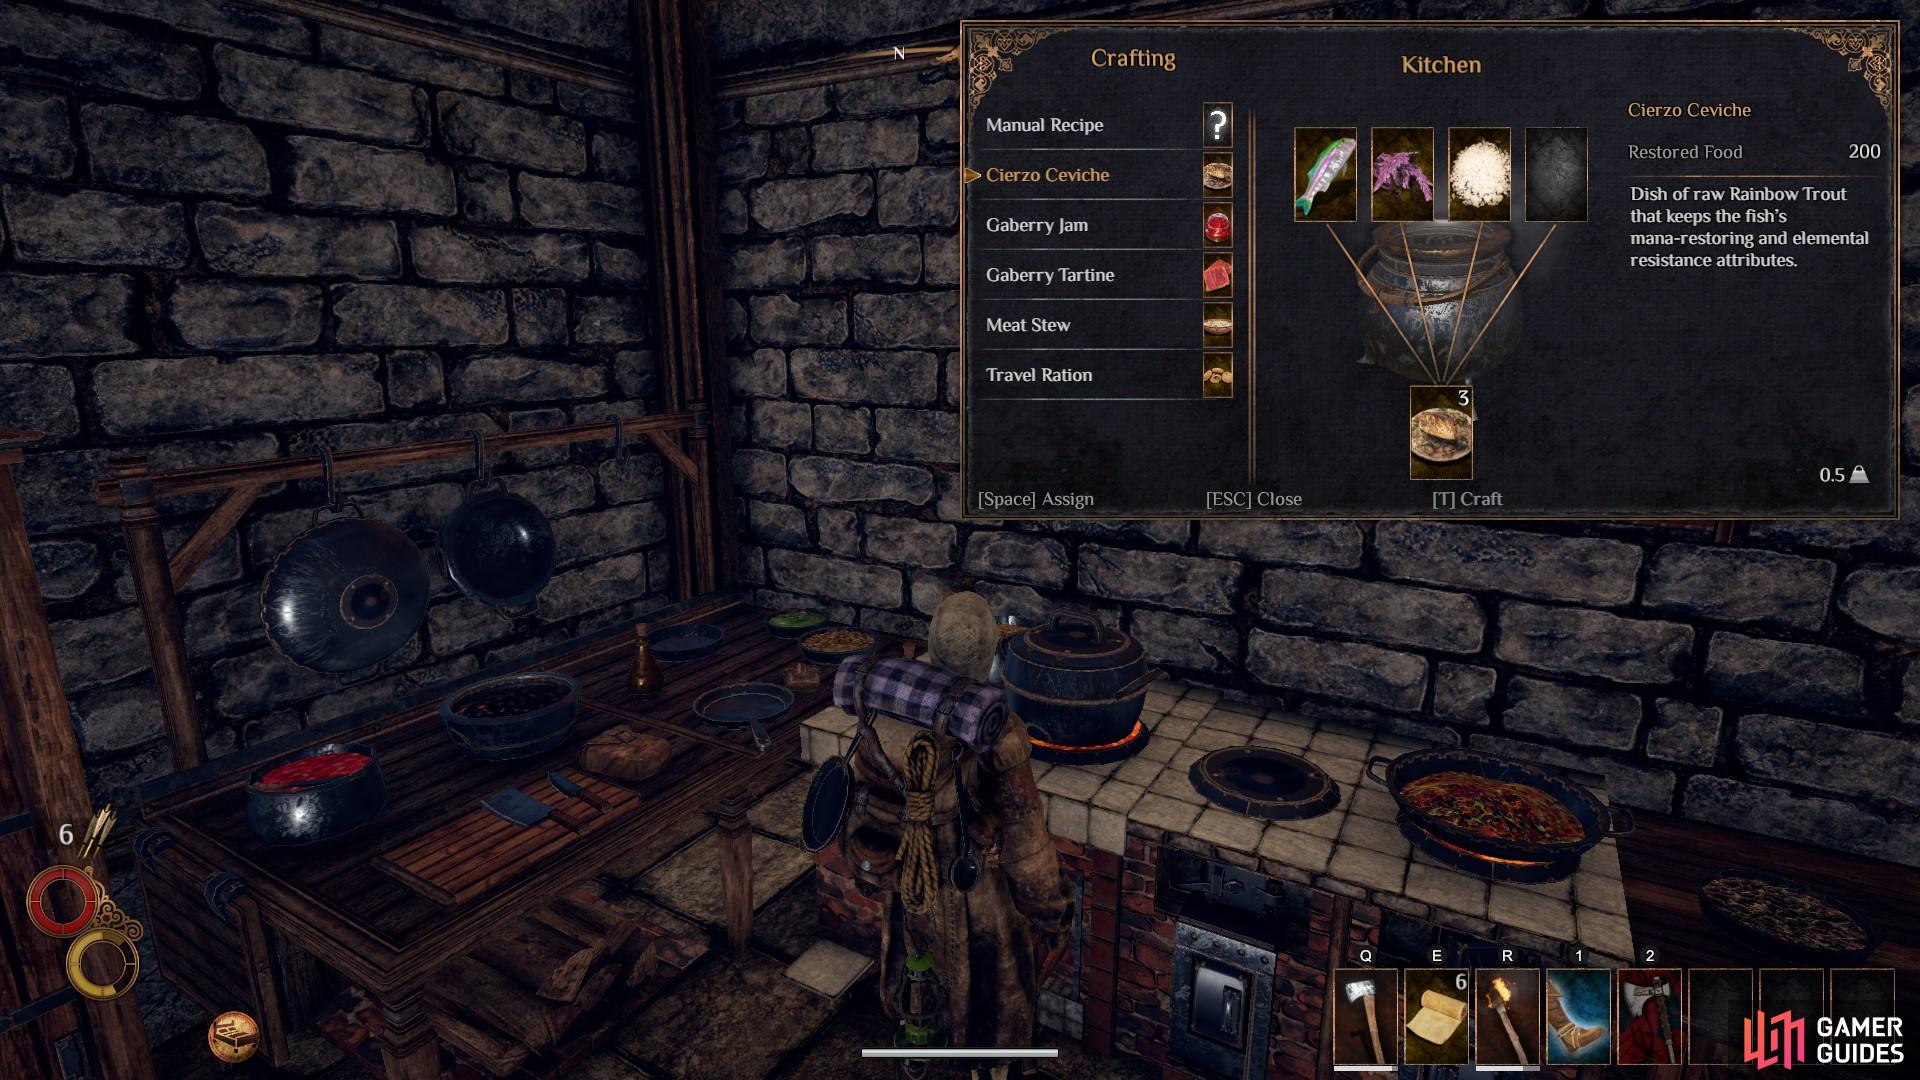 The Ceviche recipe as it appears in the crafting menu.